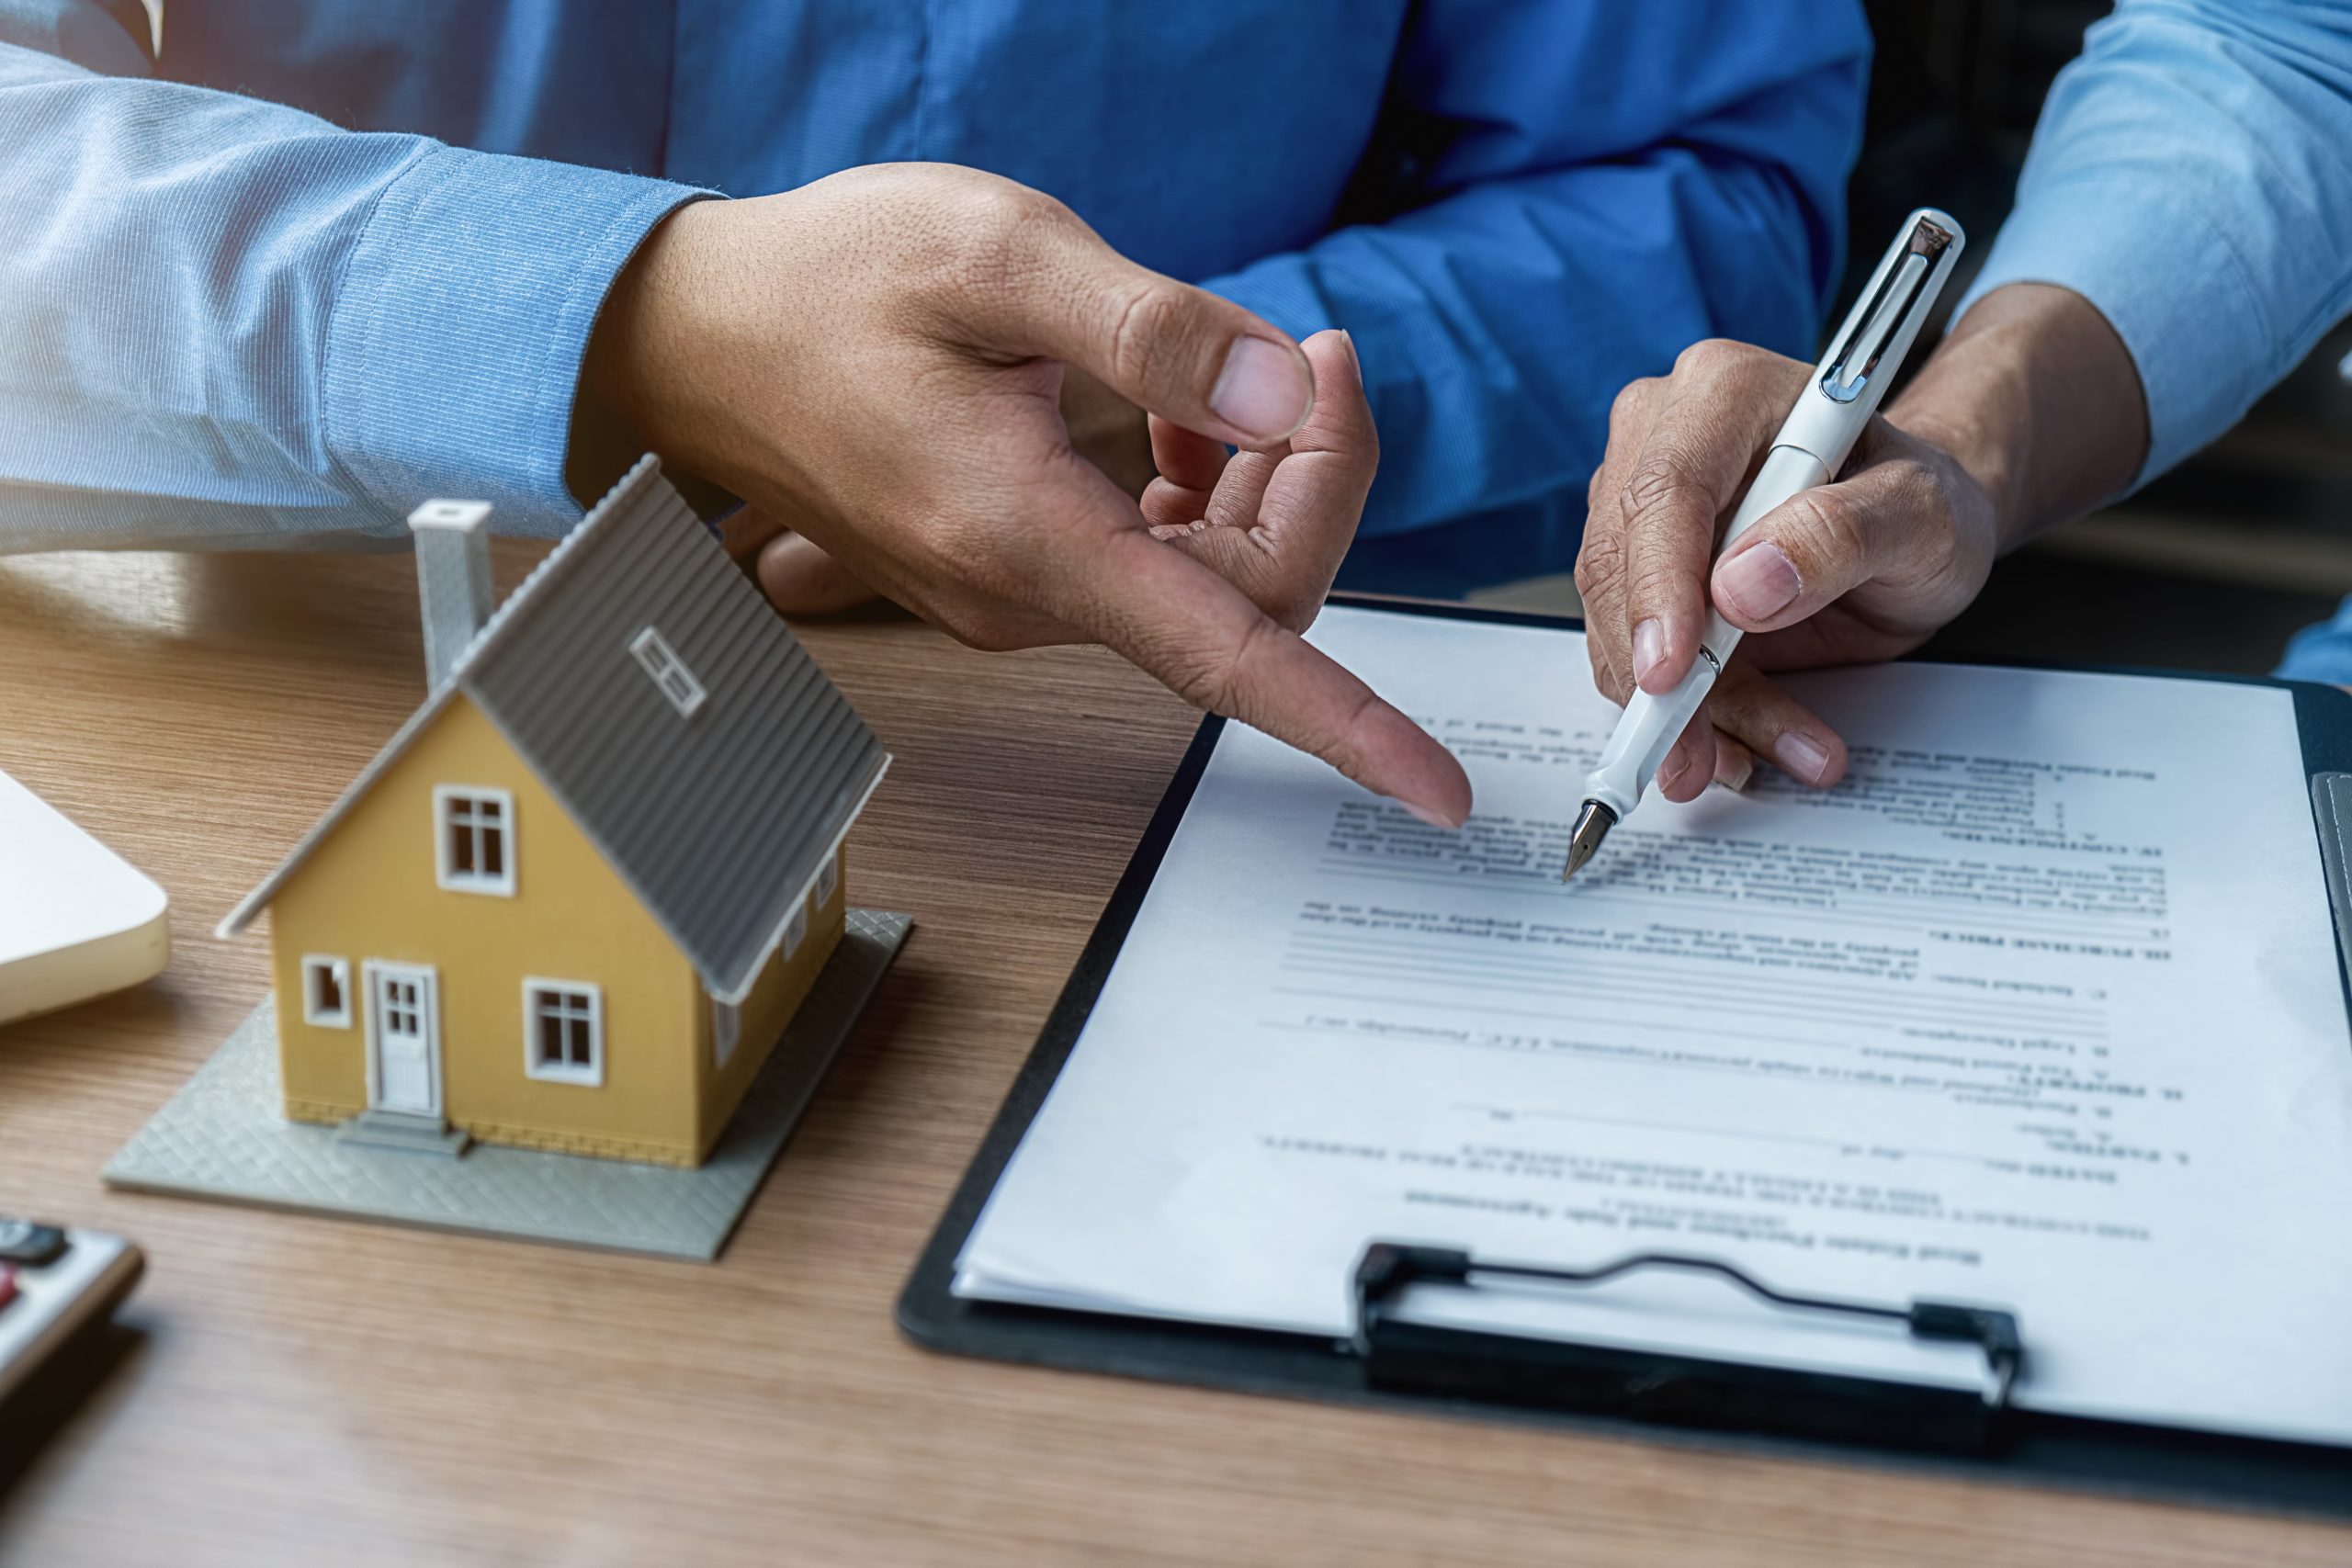 How Can You Legally Verify A Property Before Purchasing It?